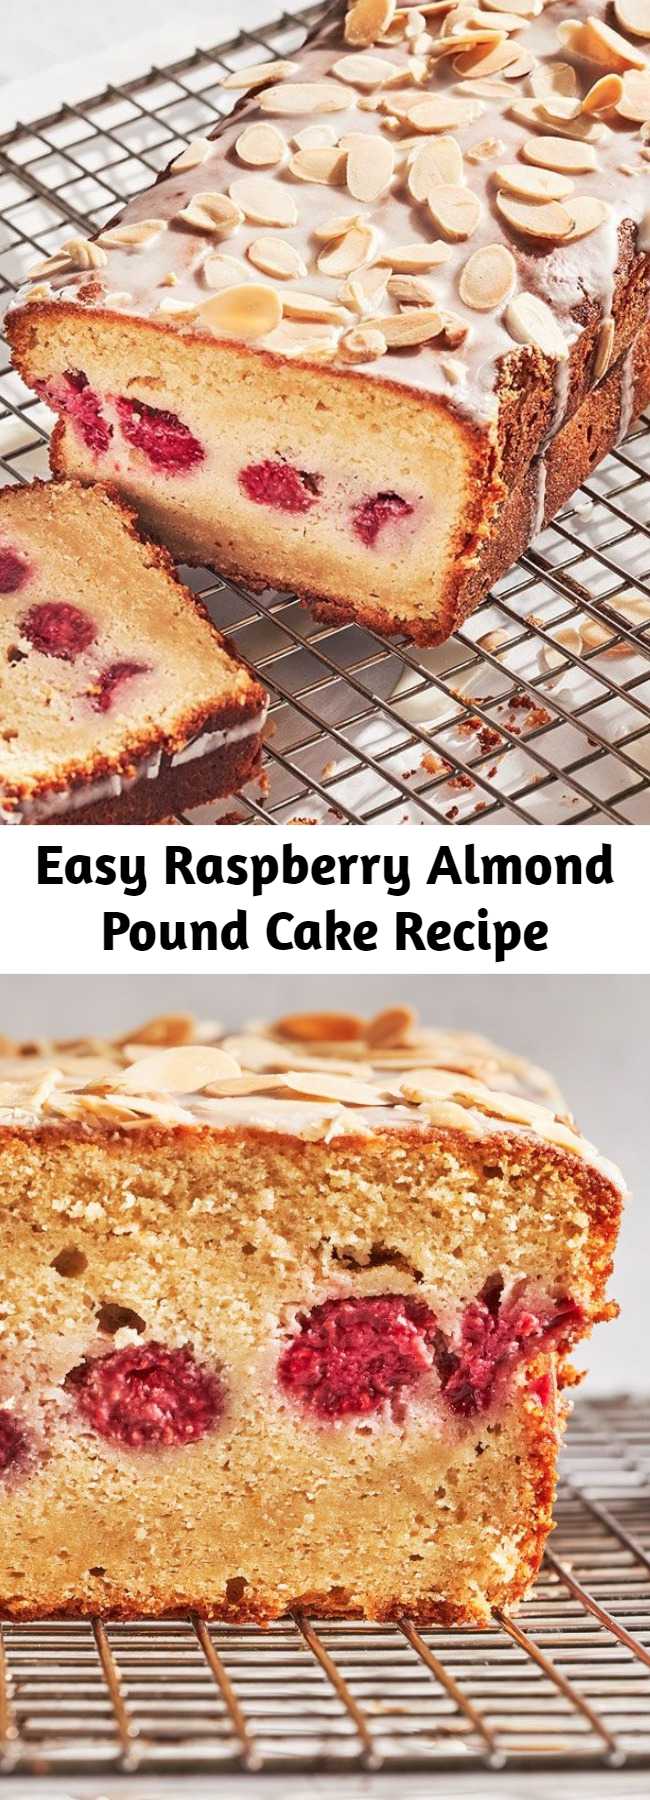 Easy Raspberry Almond Pound Cake Recipe - Raspberry Almond Pound Cake is an easy quick bread with a beautiful glaze and topped with toasted almonds.